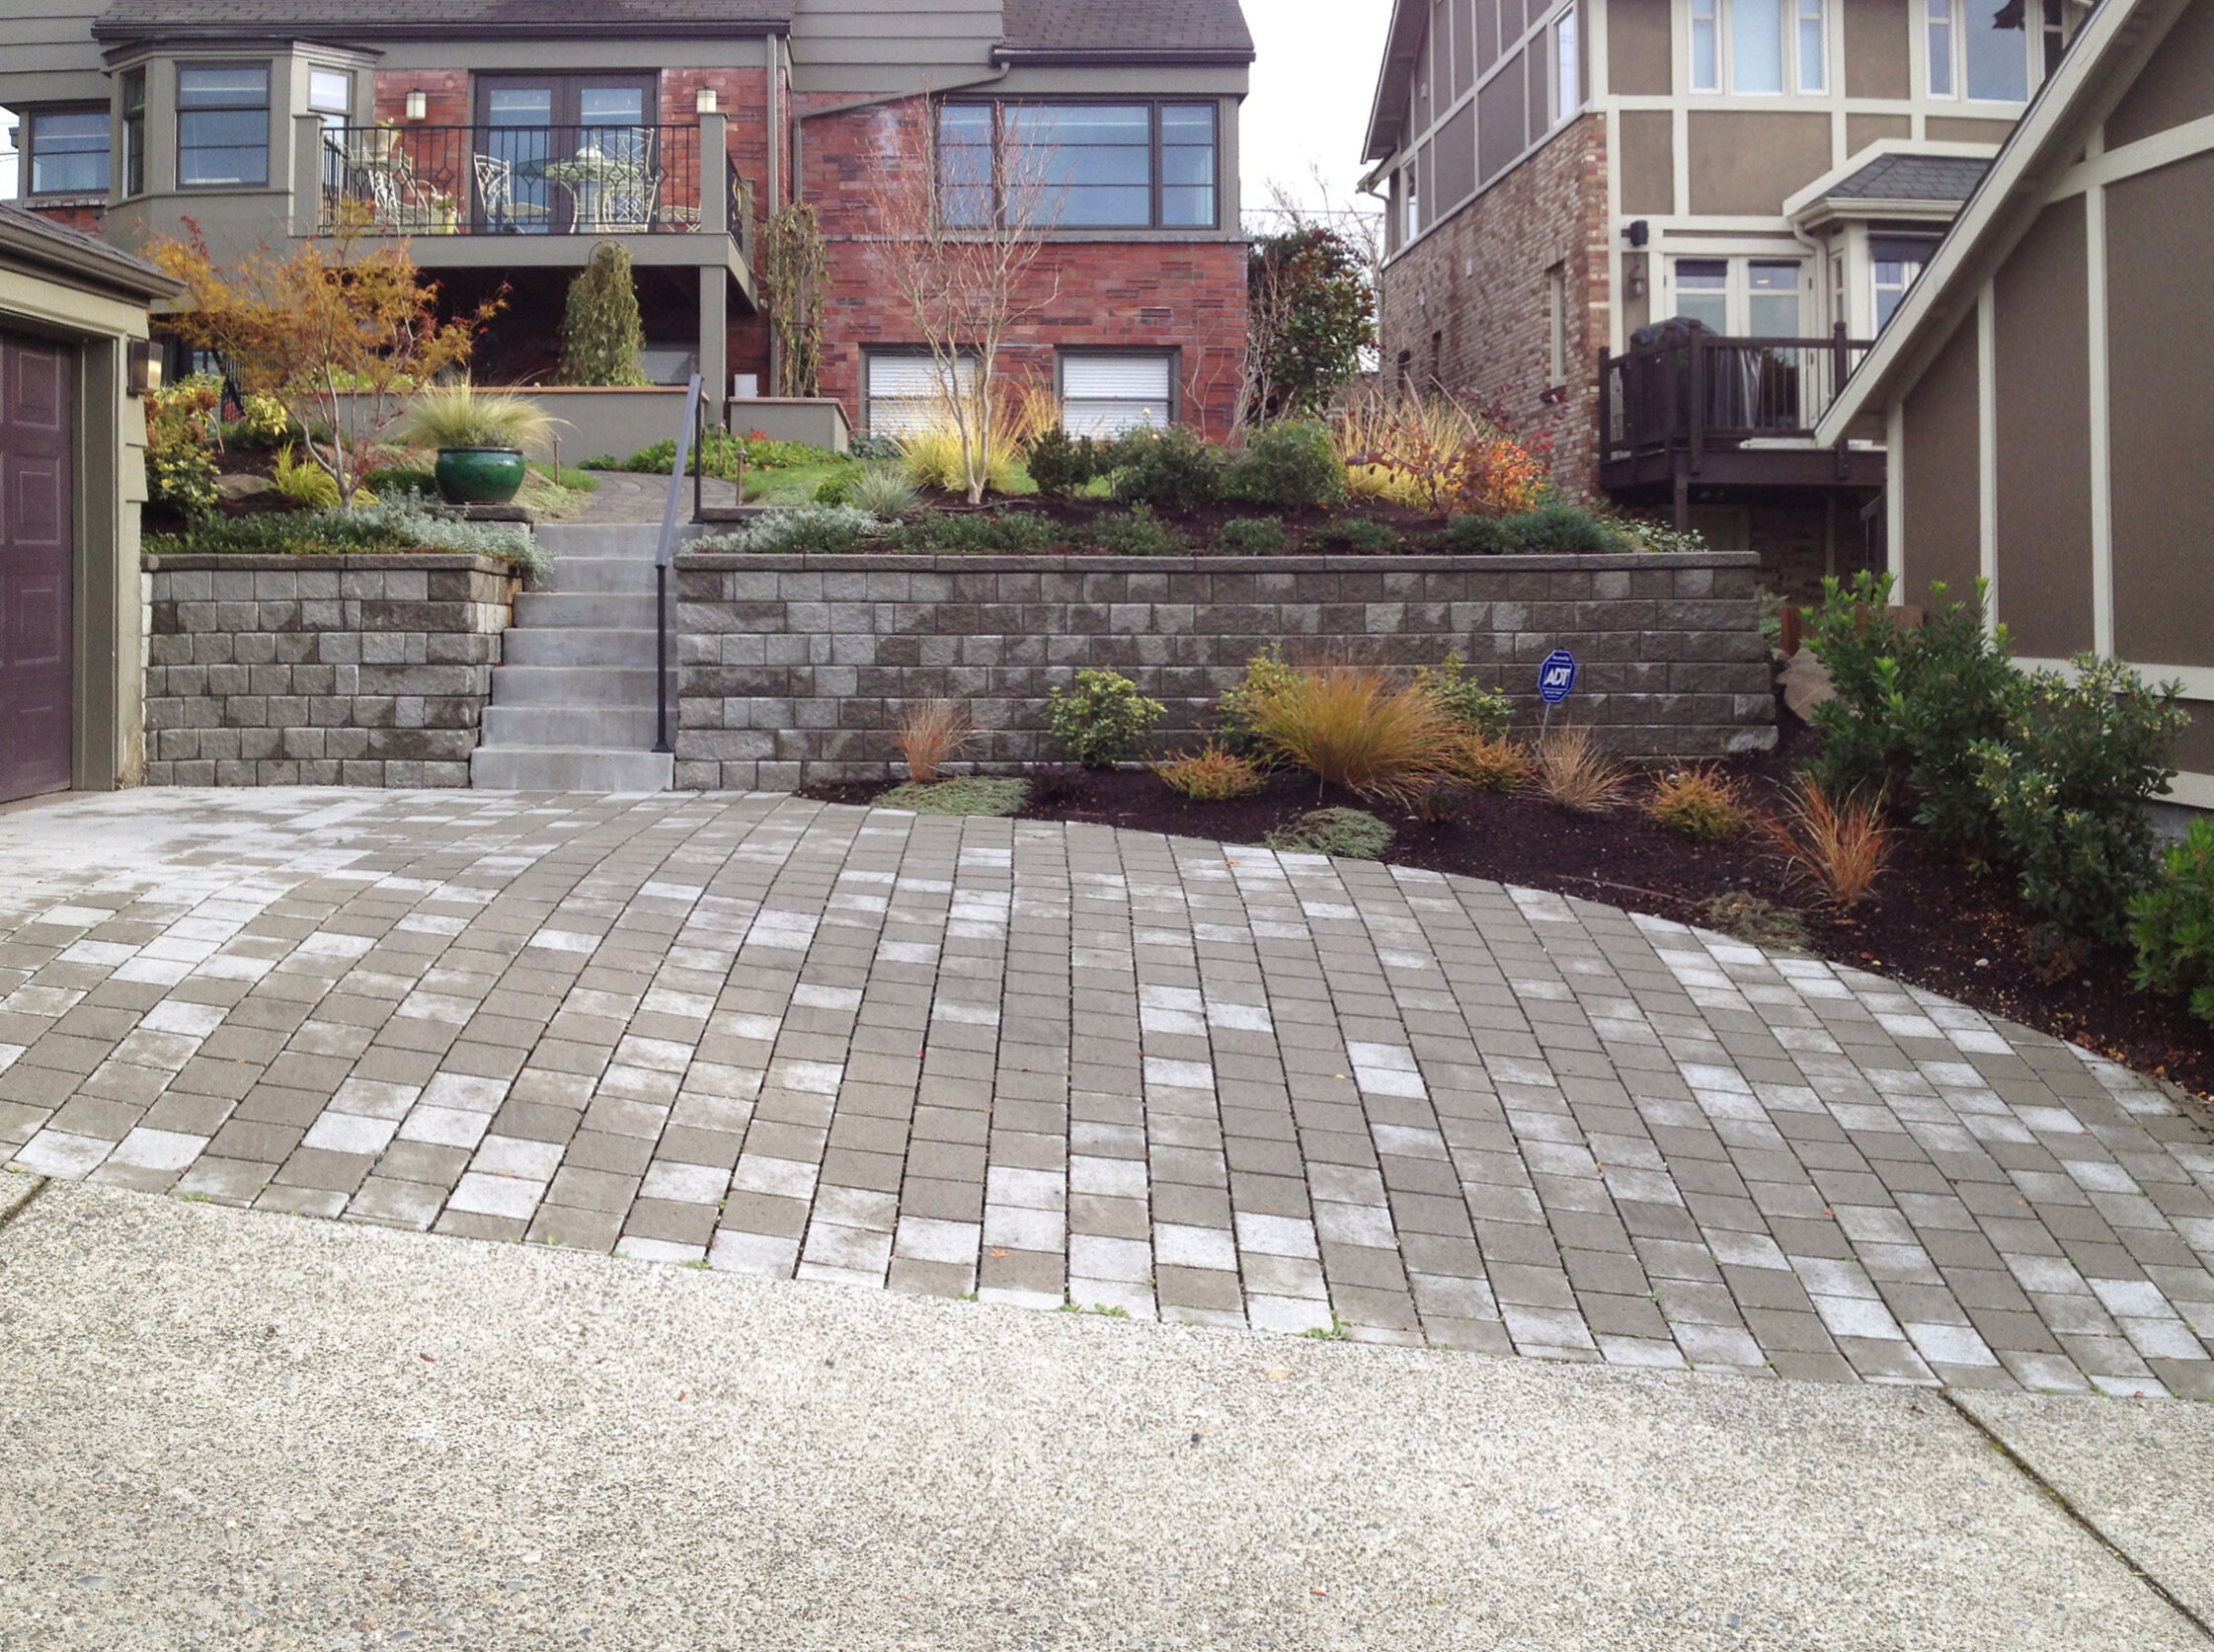 P1: CMU Retaining Wall and Etched Concrete Steps with Permeable Paver Driveway